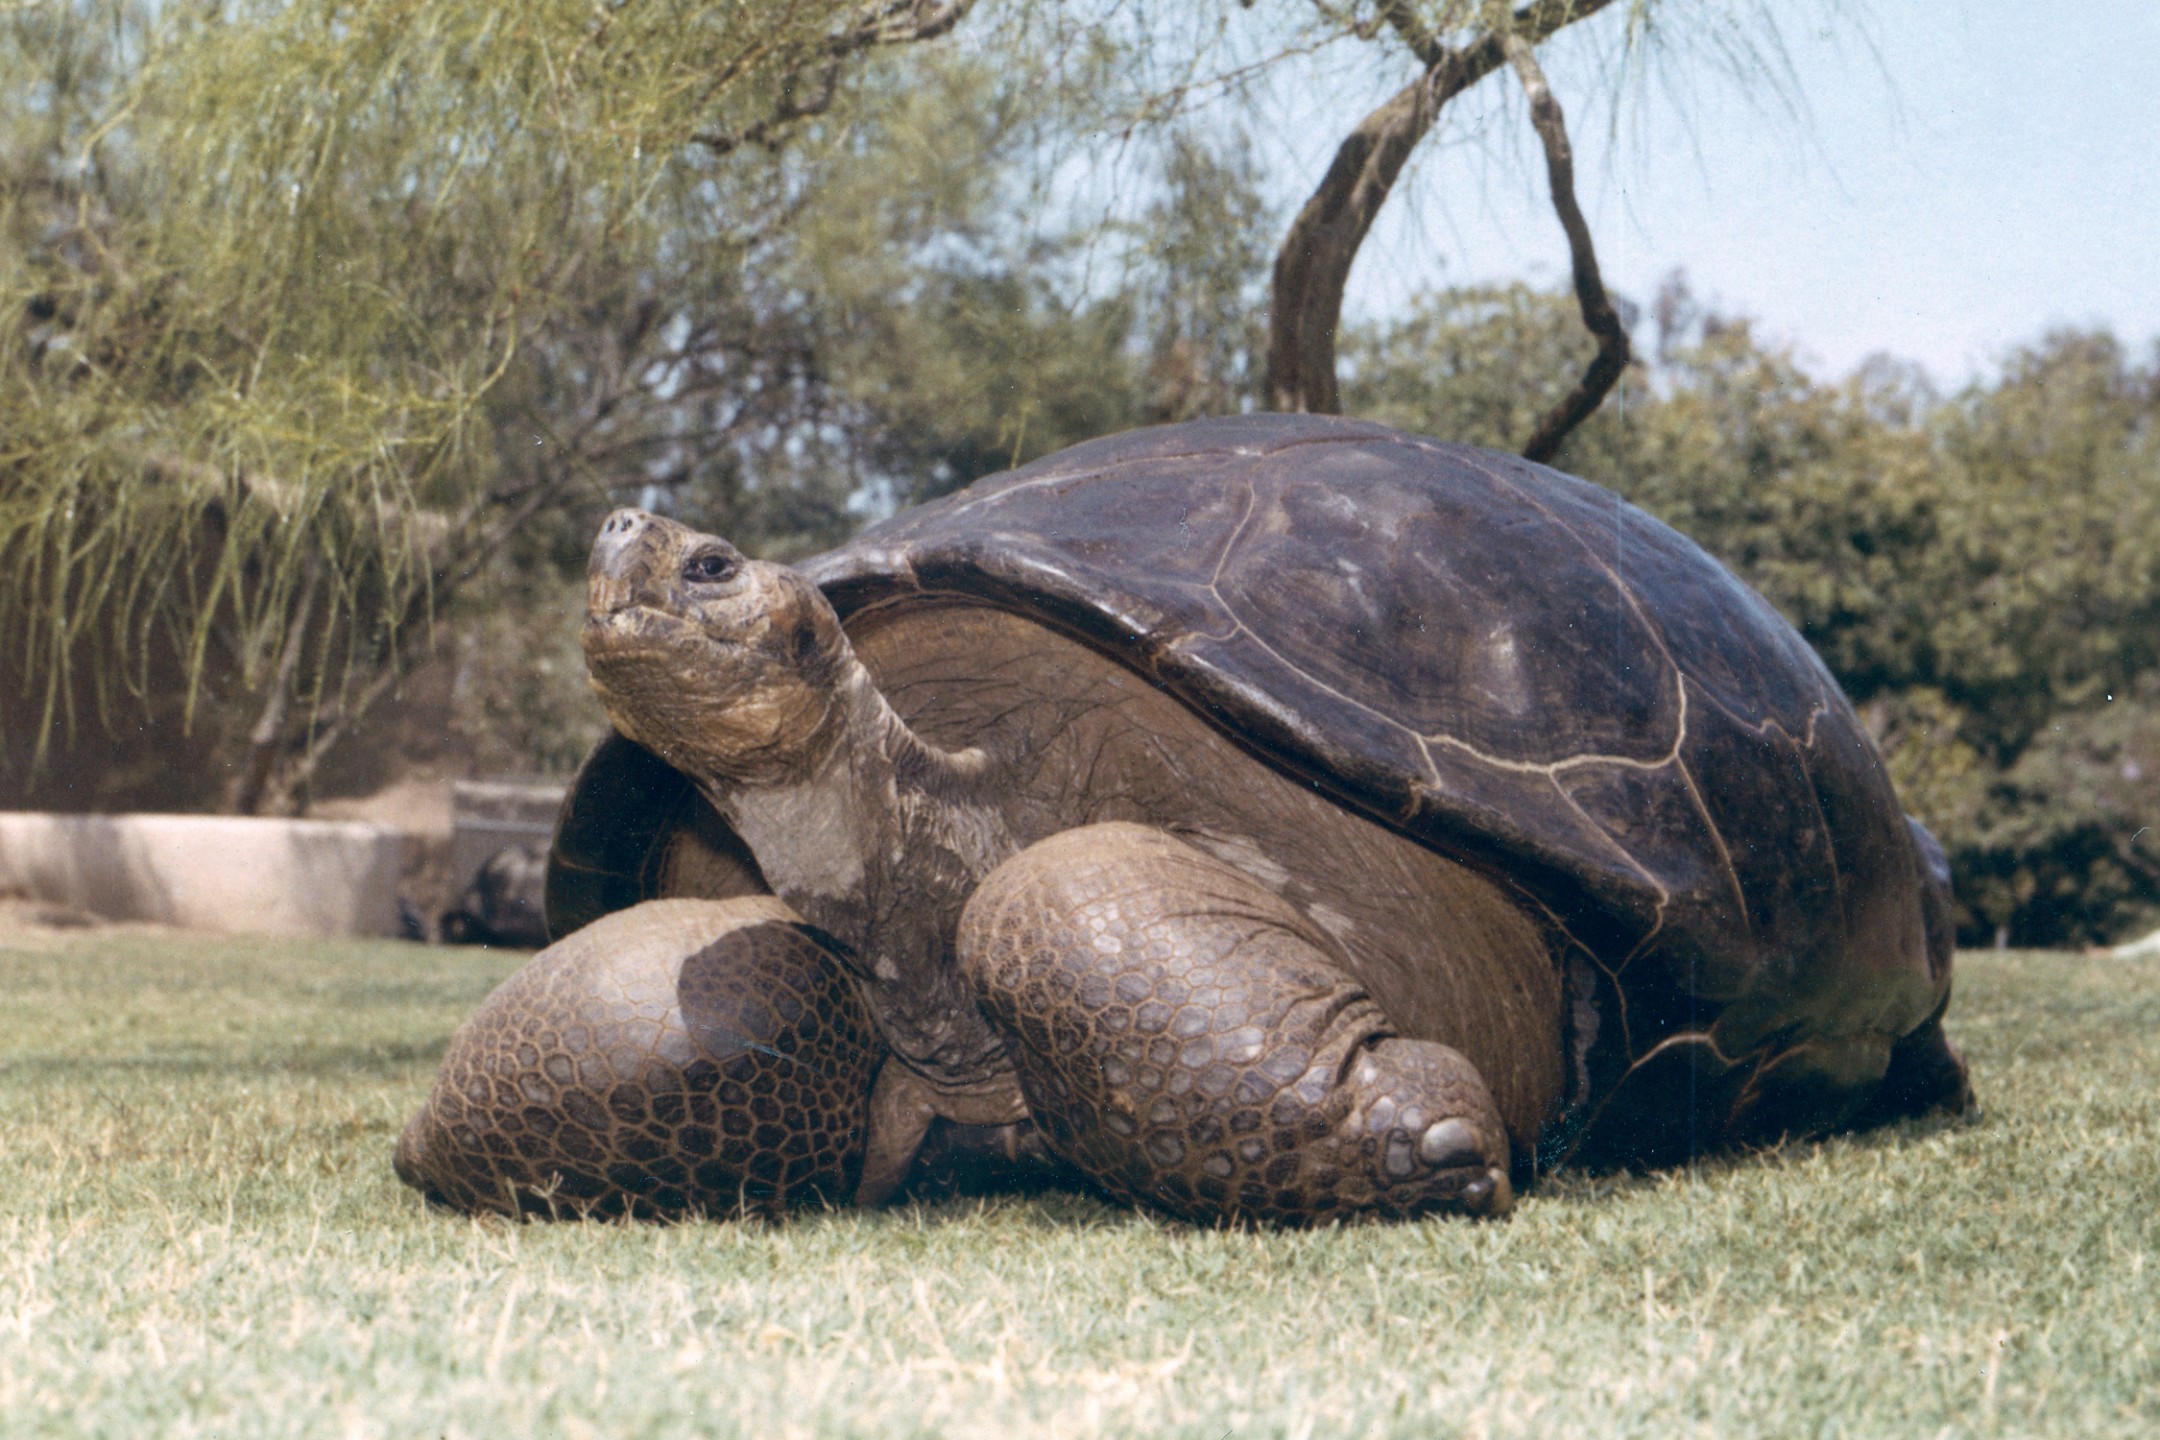 Speed the Galápagos tortoise first came to the San Diego Zoo in 1933. Each of the tortoises has a number, which is painted on their shell for record-keeping purposes, and Speed was also affectionately known among the reptile keepers and to longtime members as 